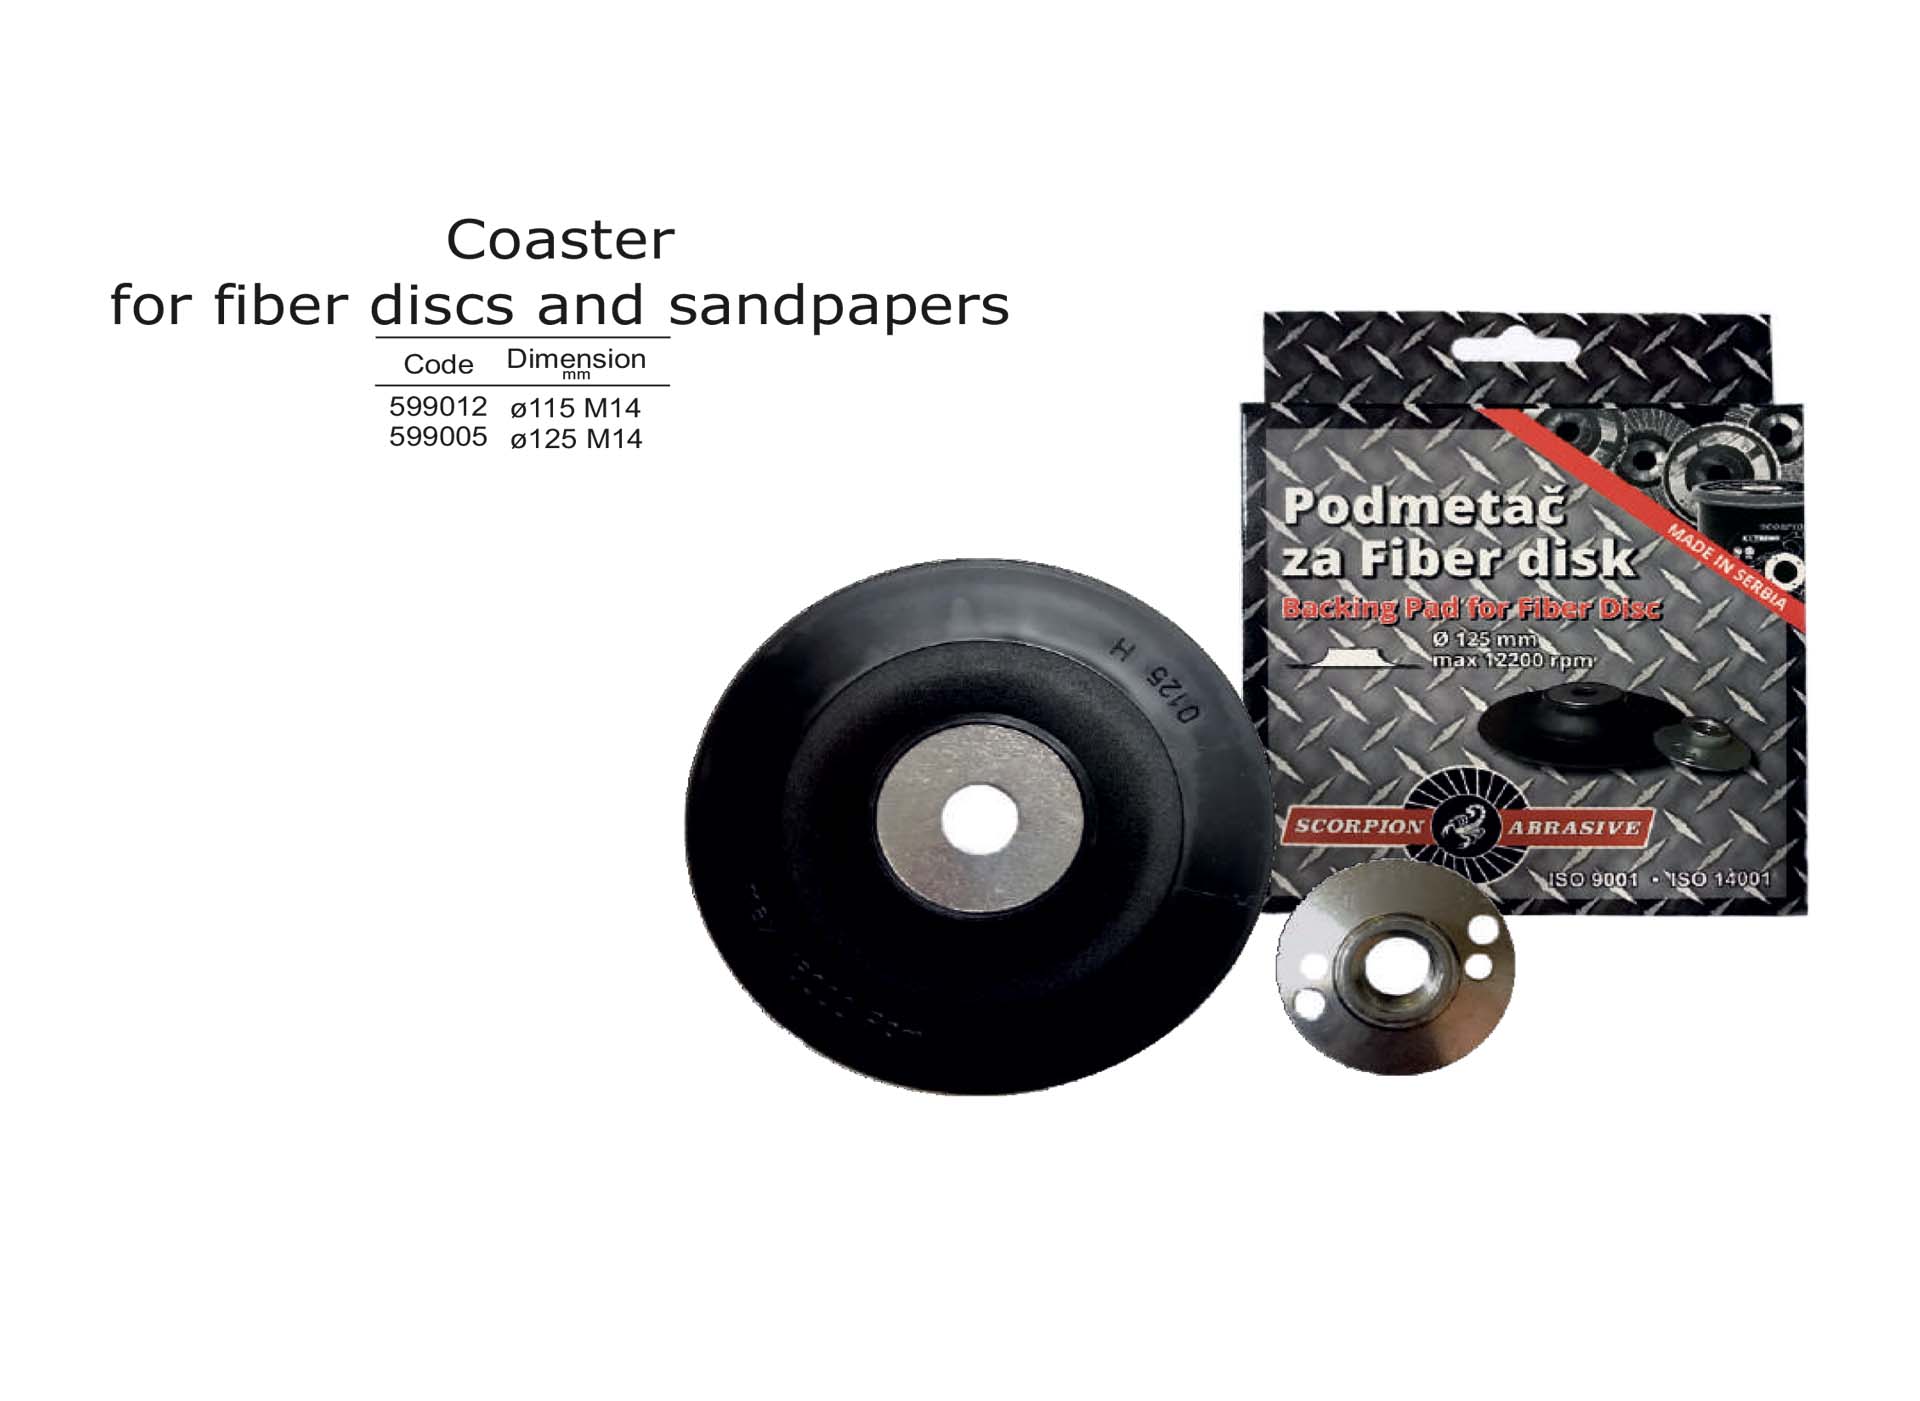 Coaster for fiber discs and sandpapers